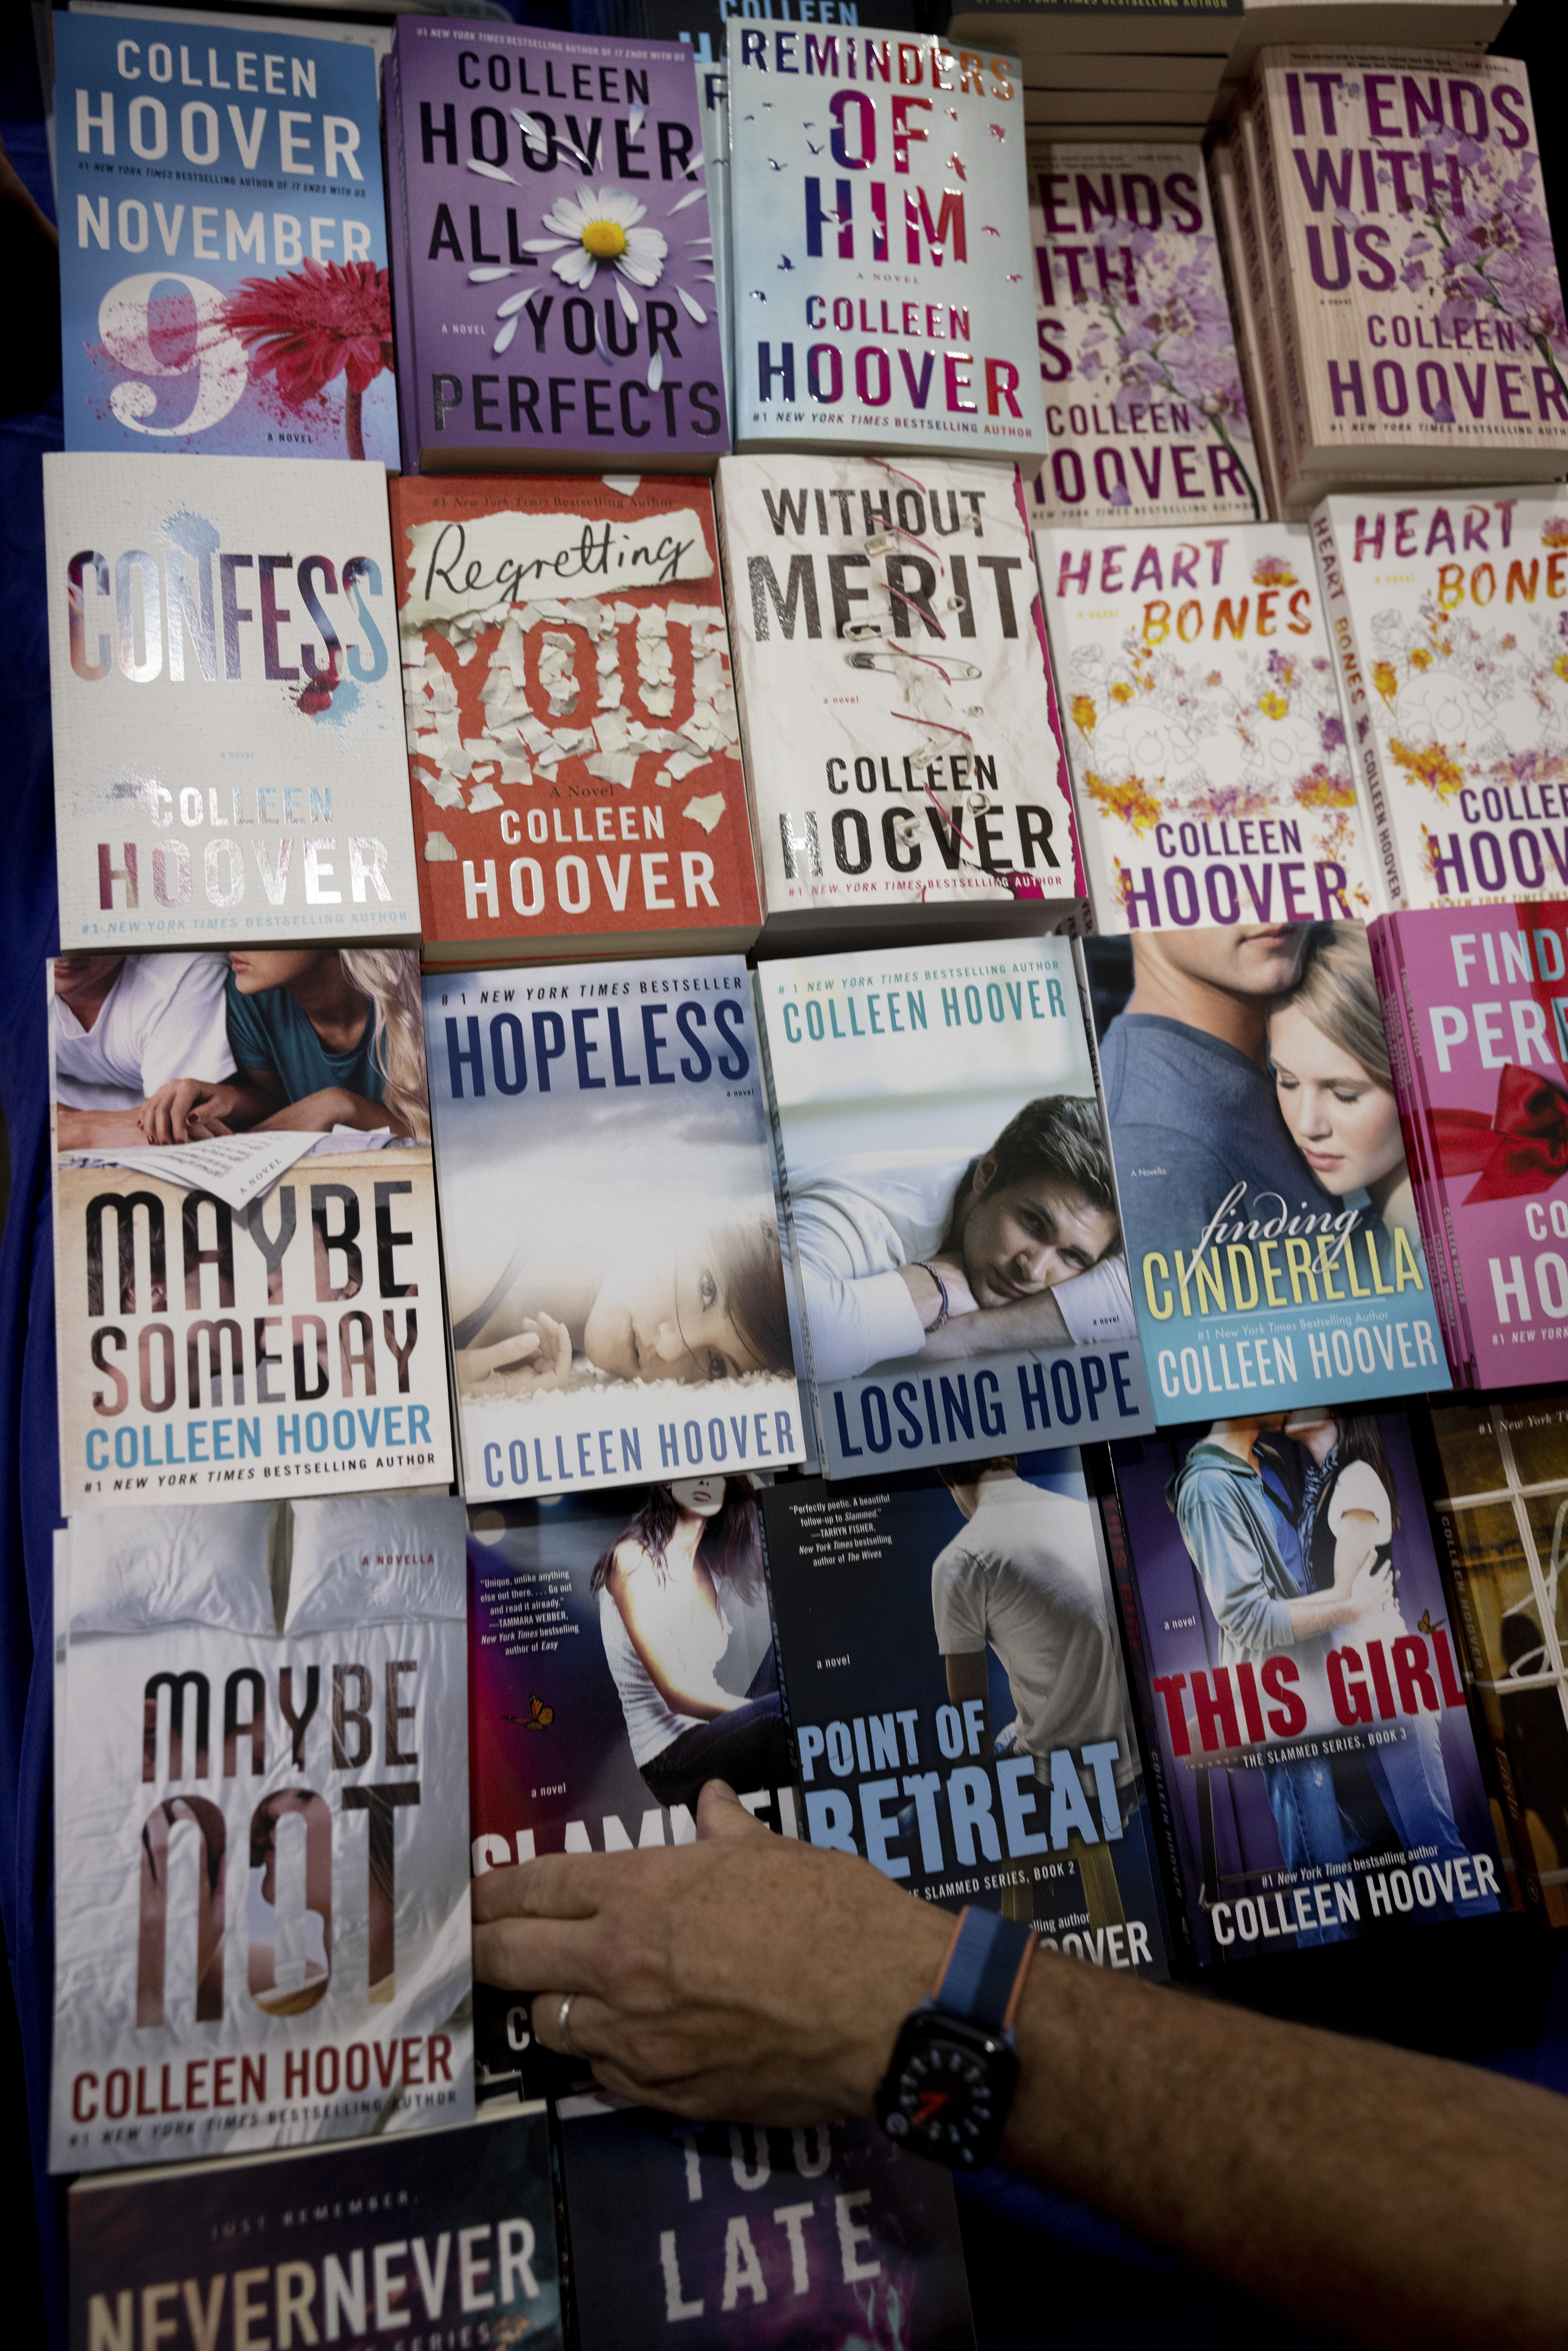 Things to Know About Best-Selling Author Colleen Hoover